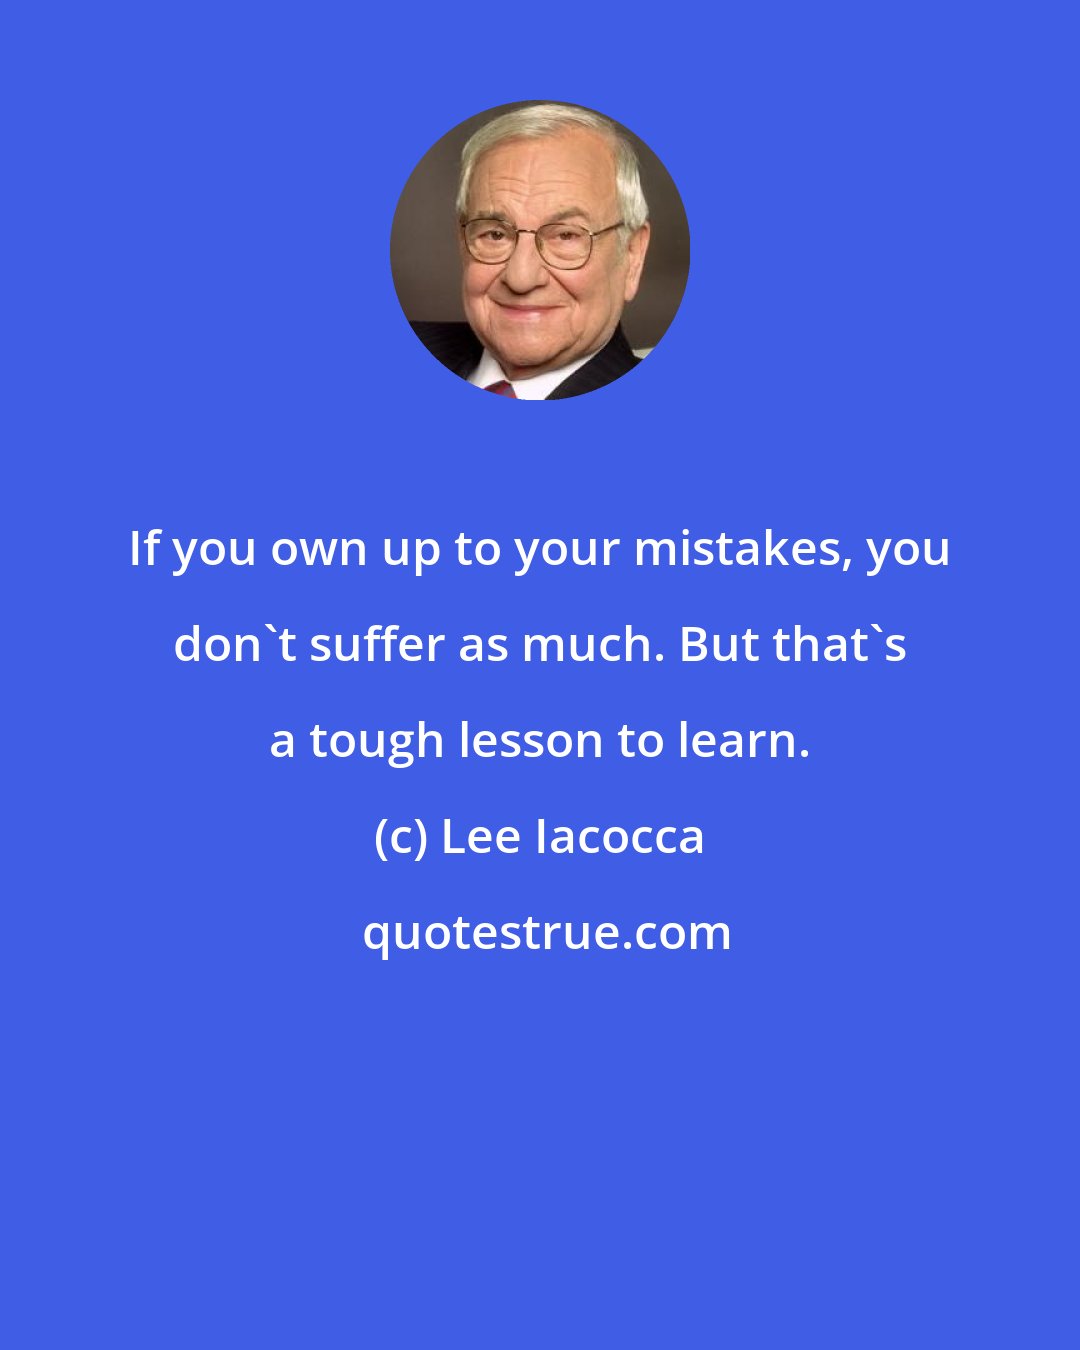 Lee Iacocca: If you own up to your mistakes, you don't suffer as much. But that's a tough lesson to learn.